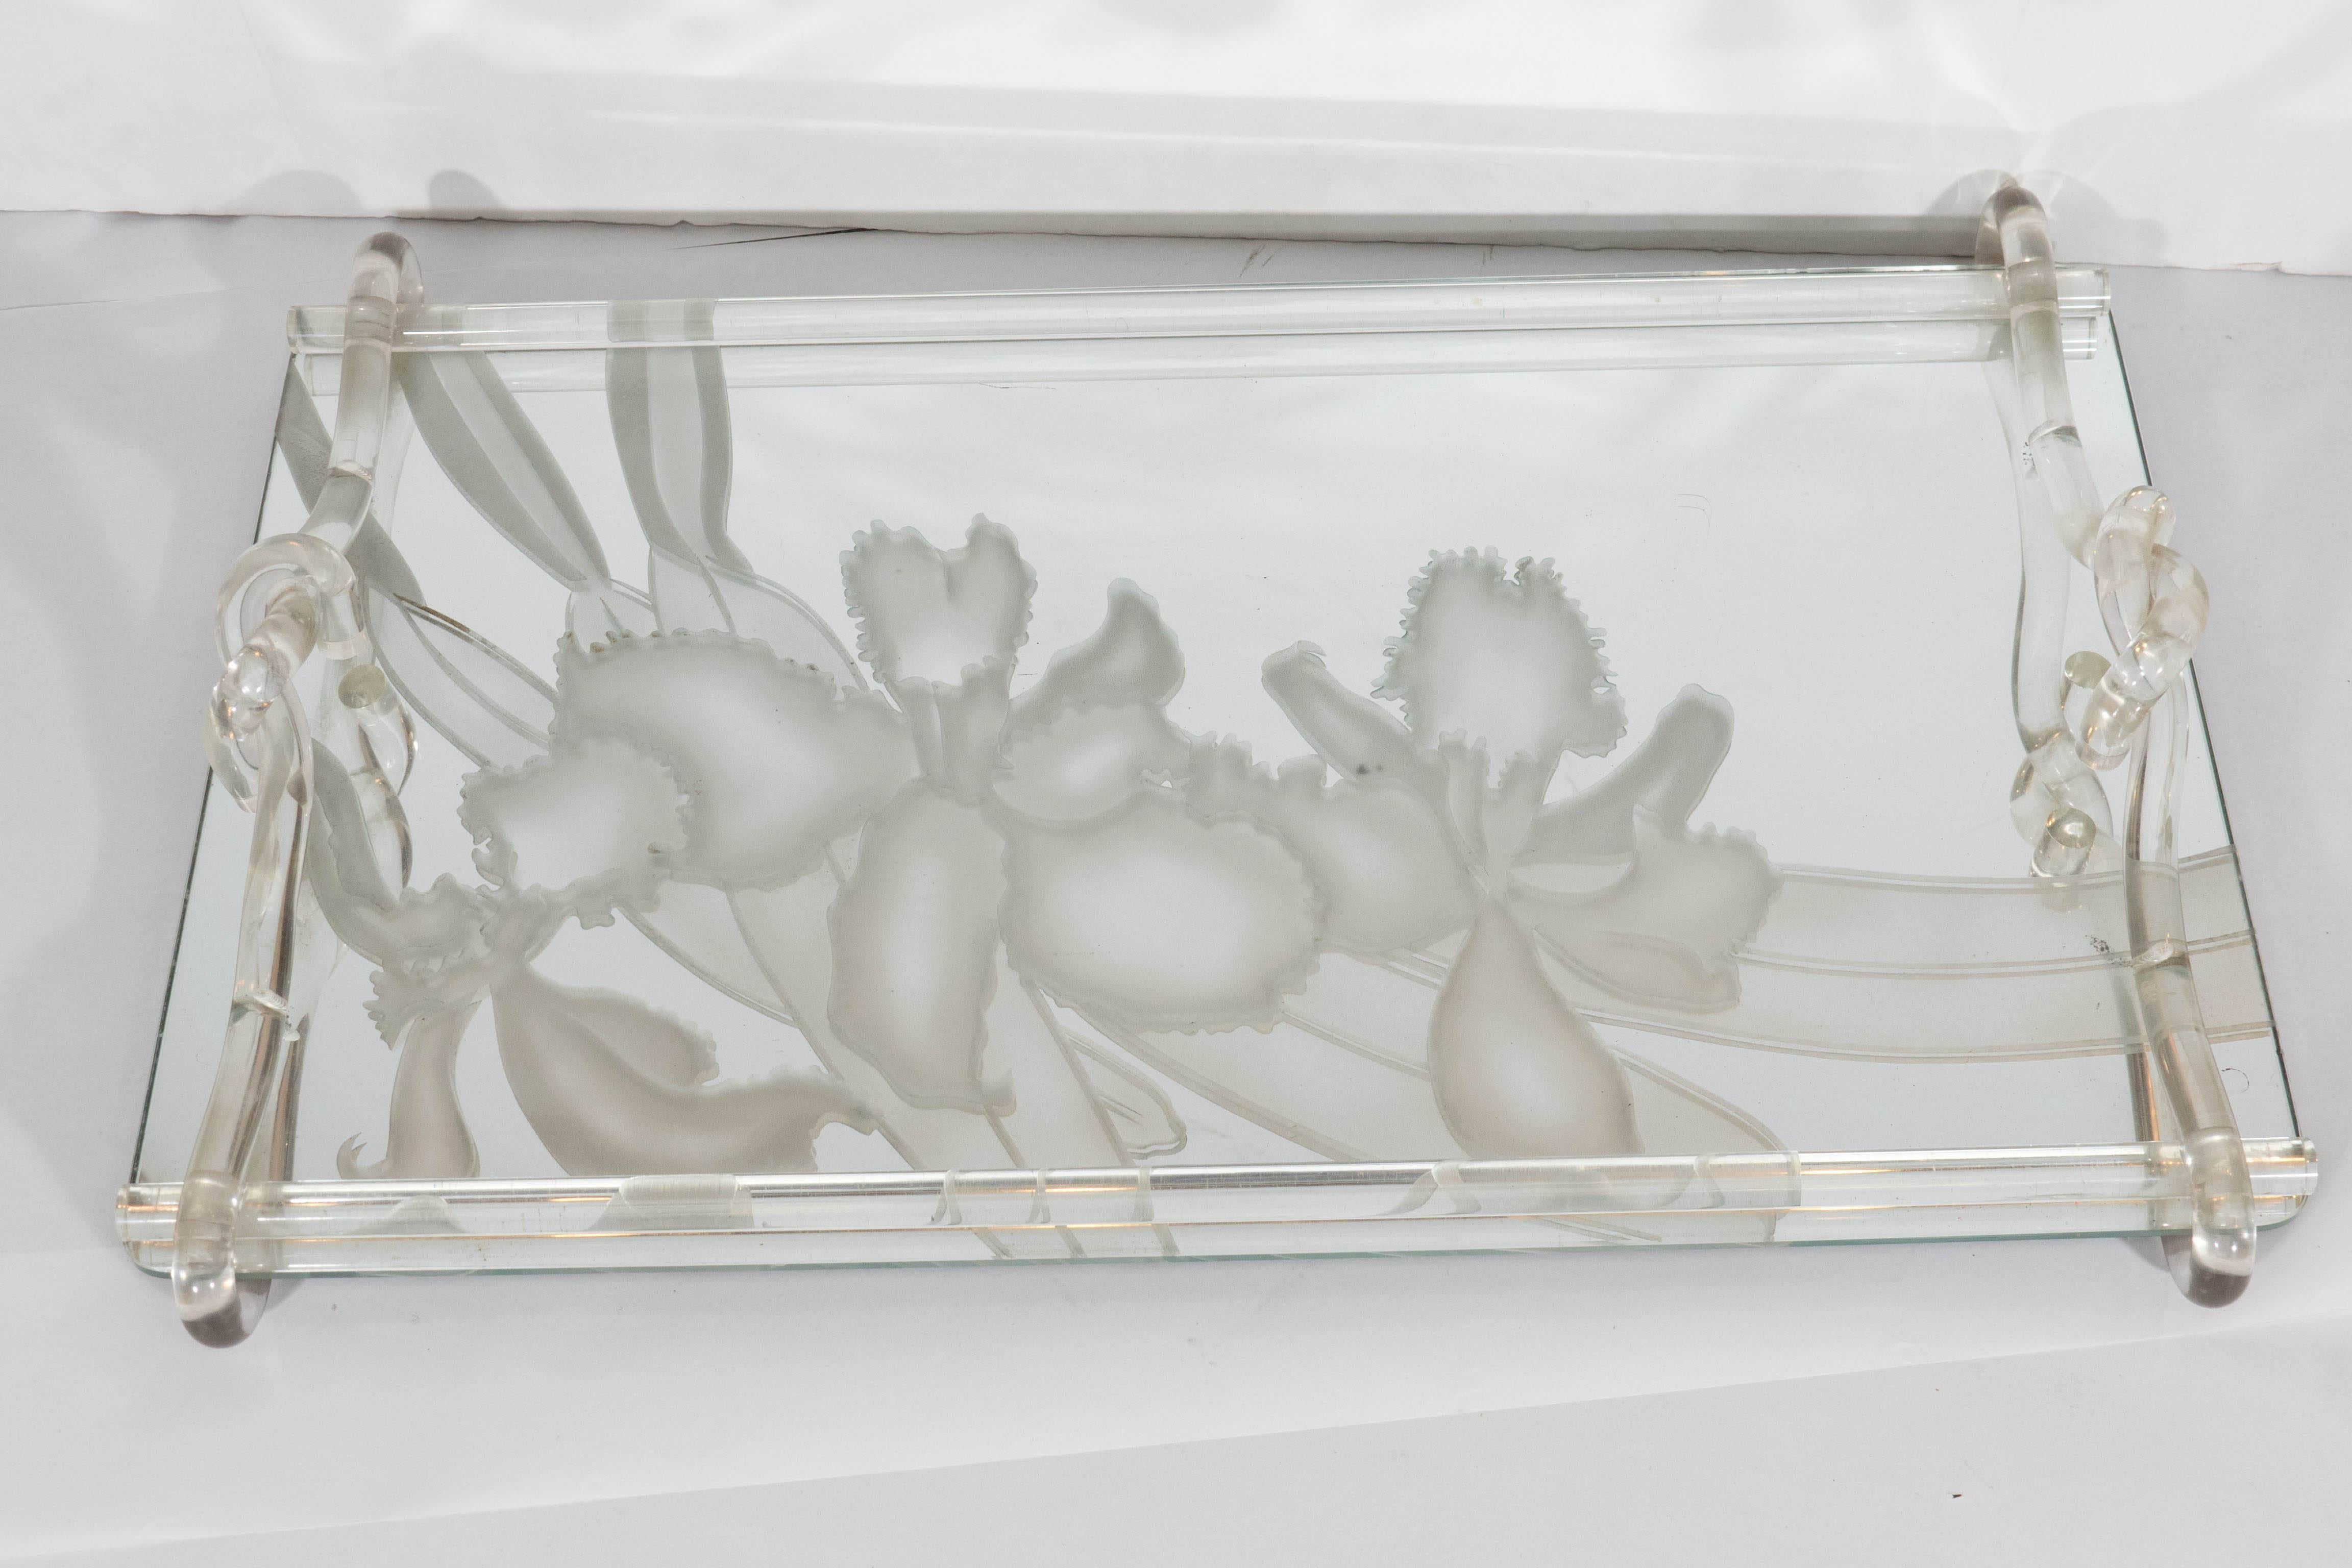 A vintage serving tray, produced sometime between the 1940s and 1950s by designer Dorothy Thorpe, with glass mirror tray, beautifully decorated with layered etchings of floral designs, inset within looped Lucite handles. This piece is in very good